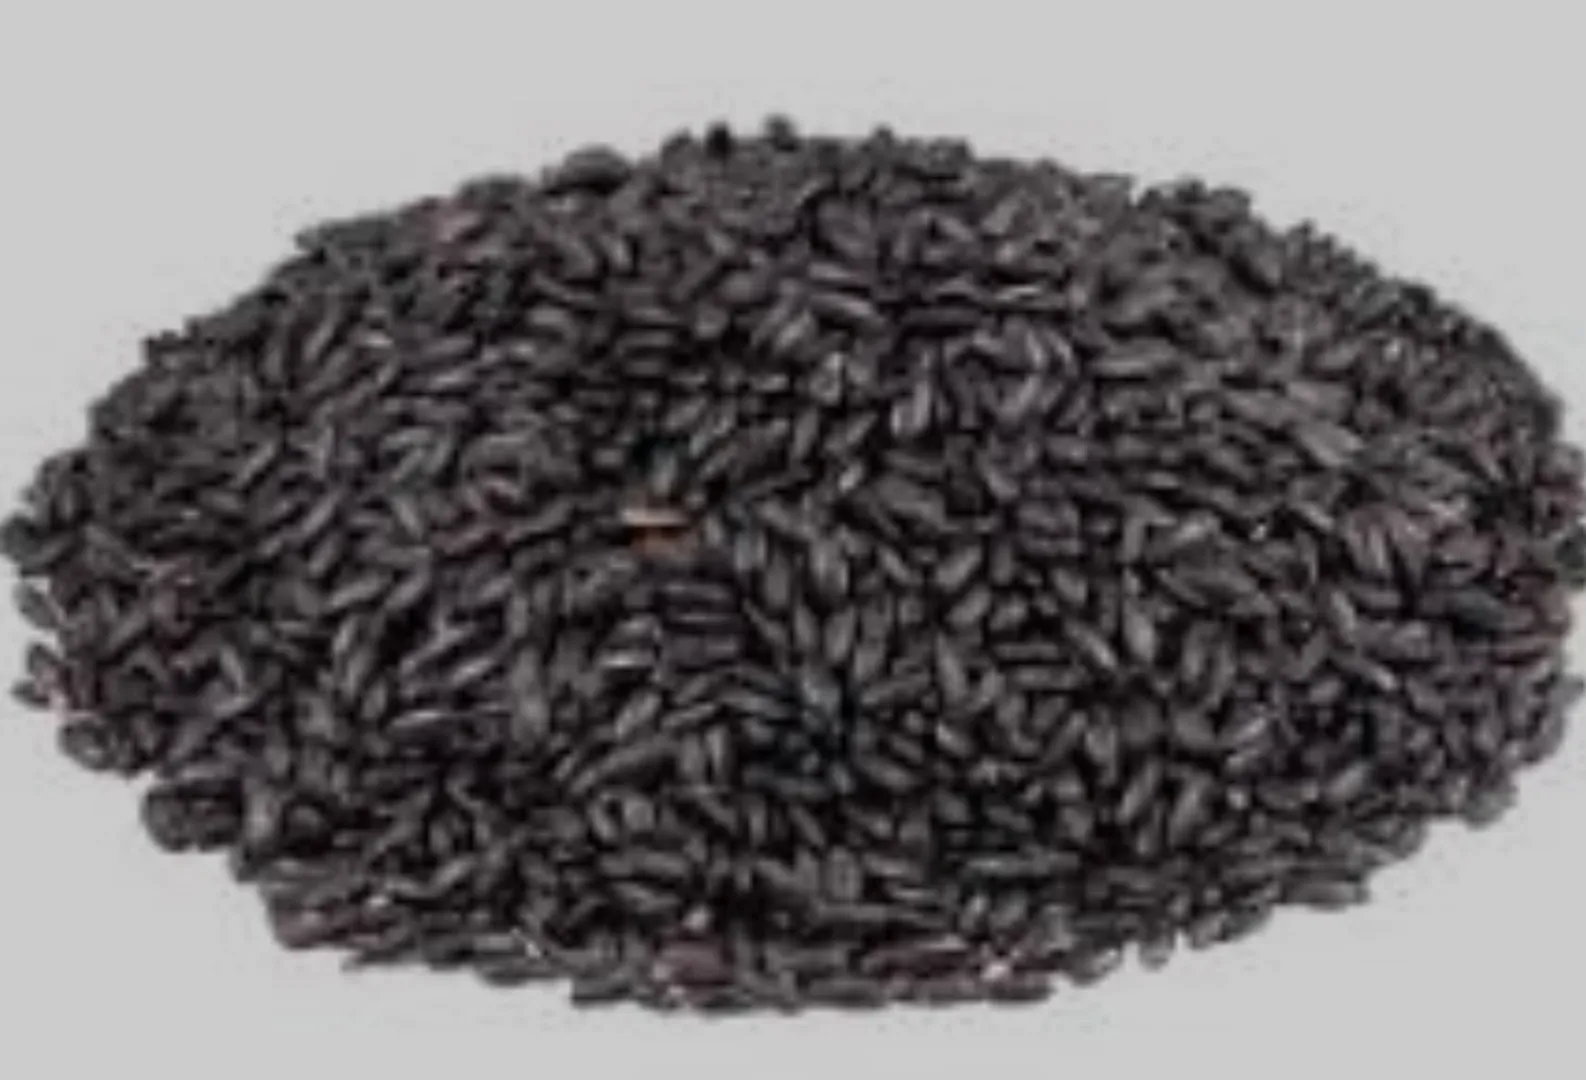 Black Rice: Rich in antioxidants like anthocyanins, black rice helps reduce oxidative stress, lowering the risk of heart disease and diabetes.